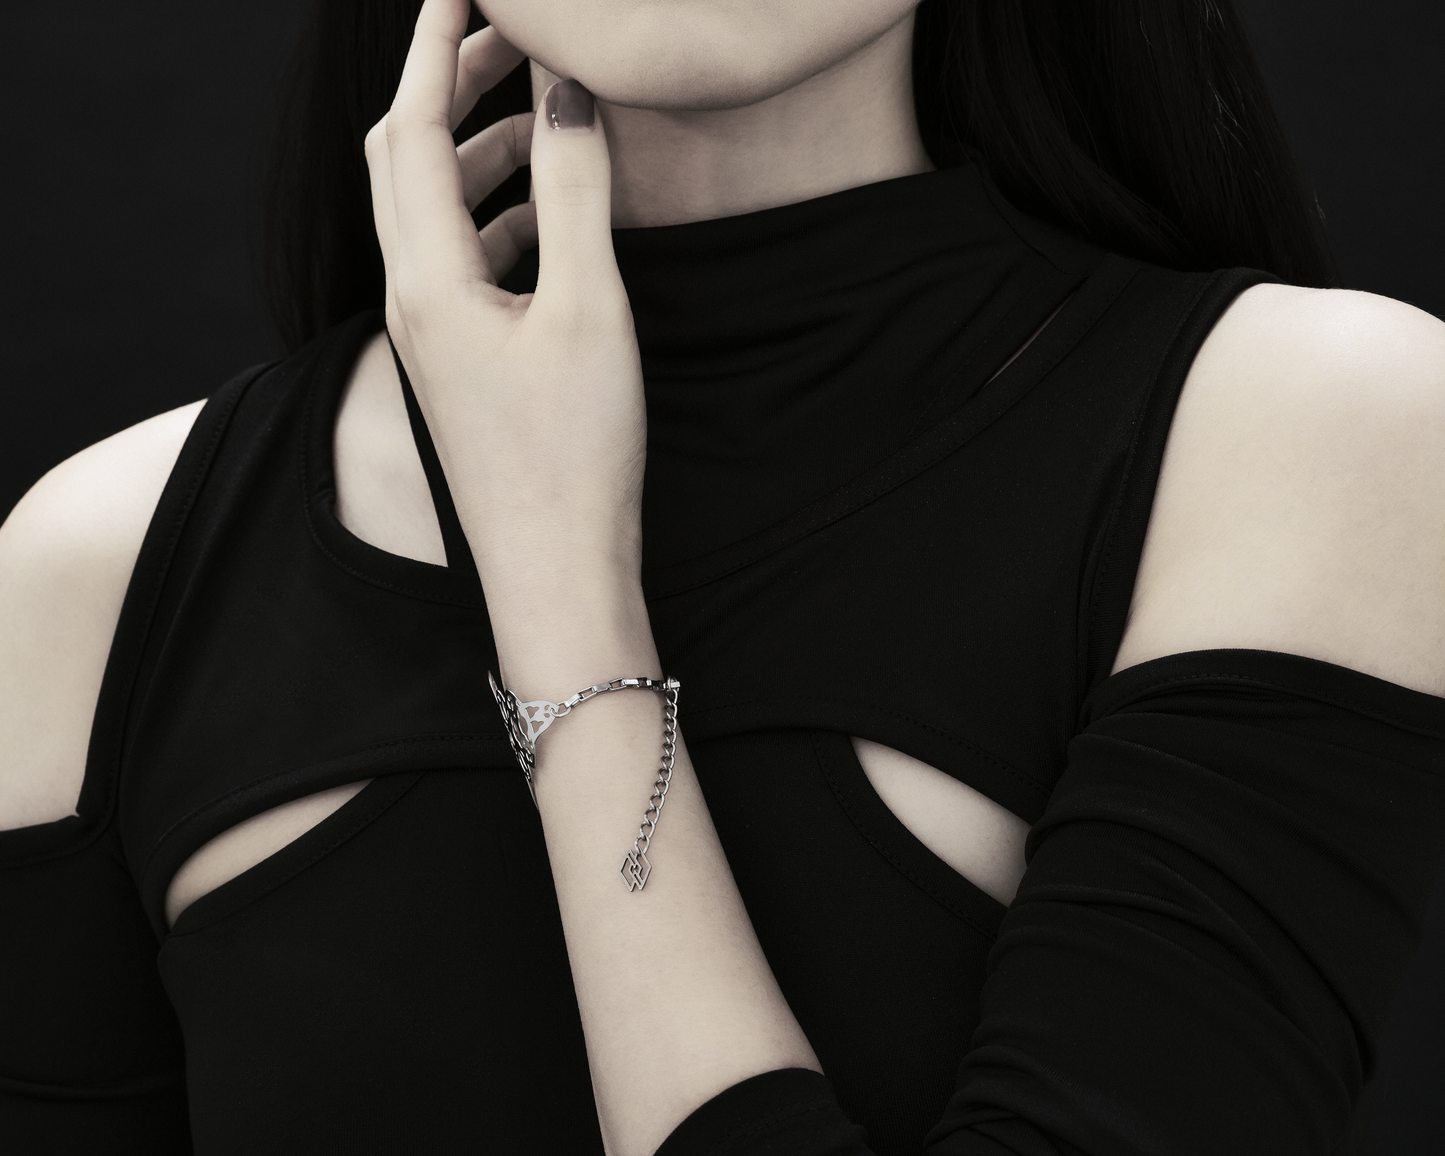 A model poses with a Myril Jewels bracelet, the intricate design inspired by gothic architecture. This sophisticated accessory is ideal for those who appreciate neo-gothic jewelry, adding an avant-garde touch to any ensemble. It’s perfect for goth enthusiasts, adding elegance to everyday wear or special events.